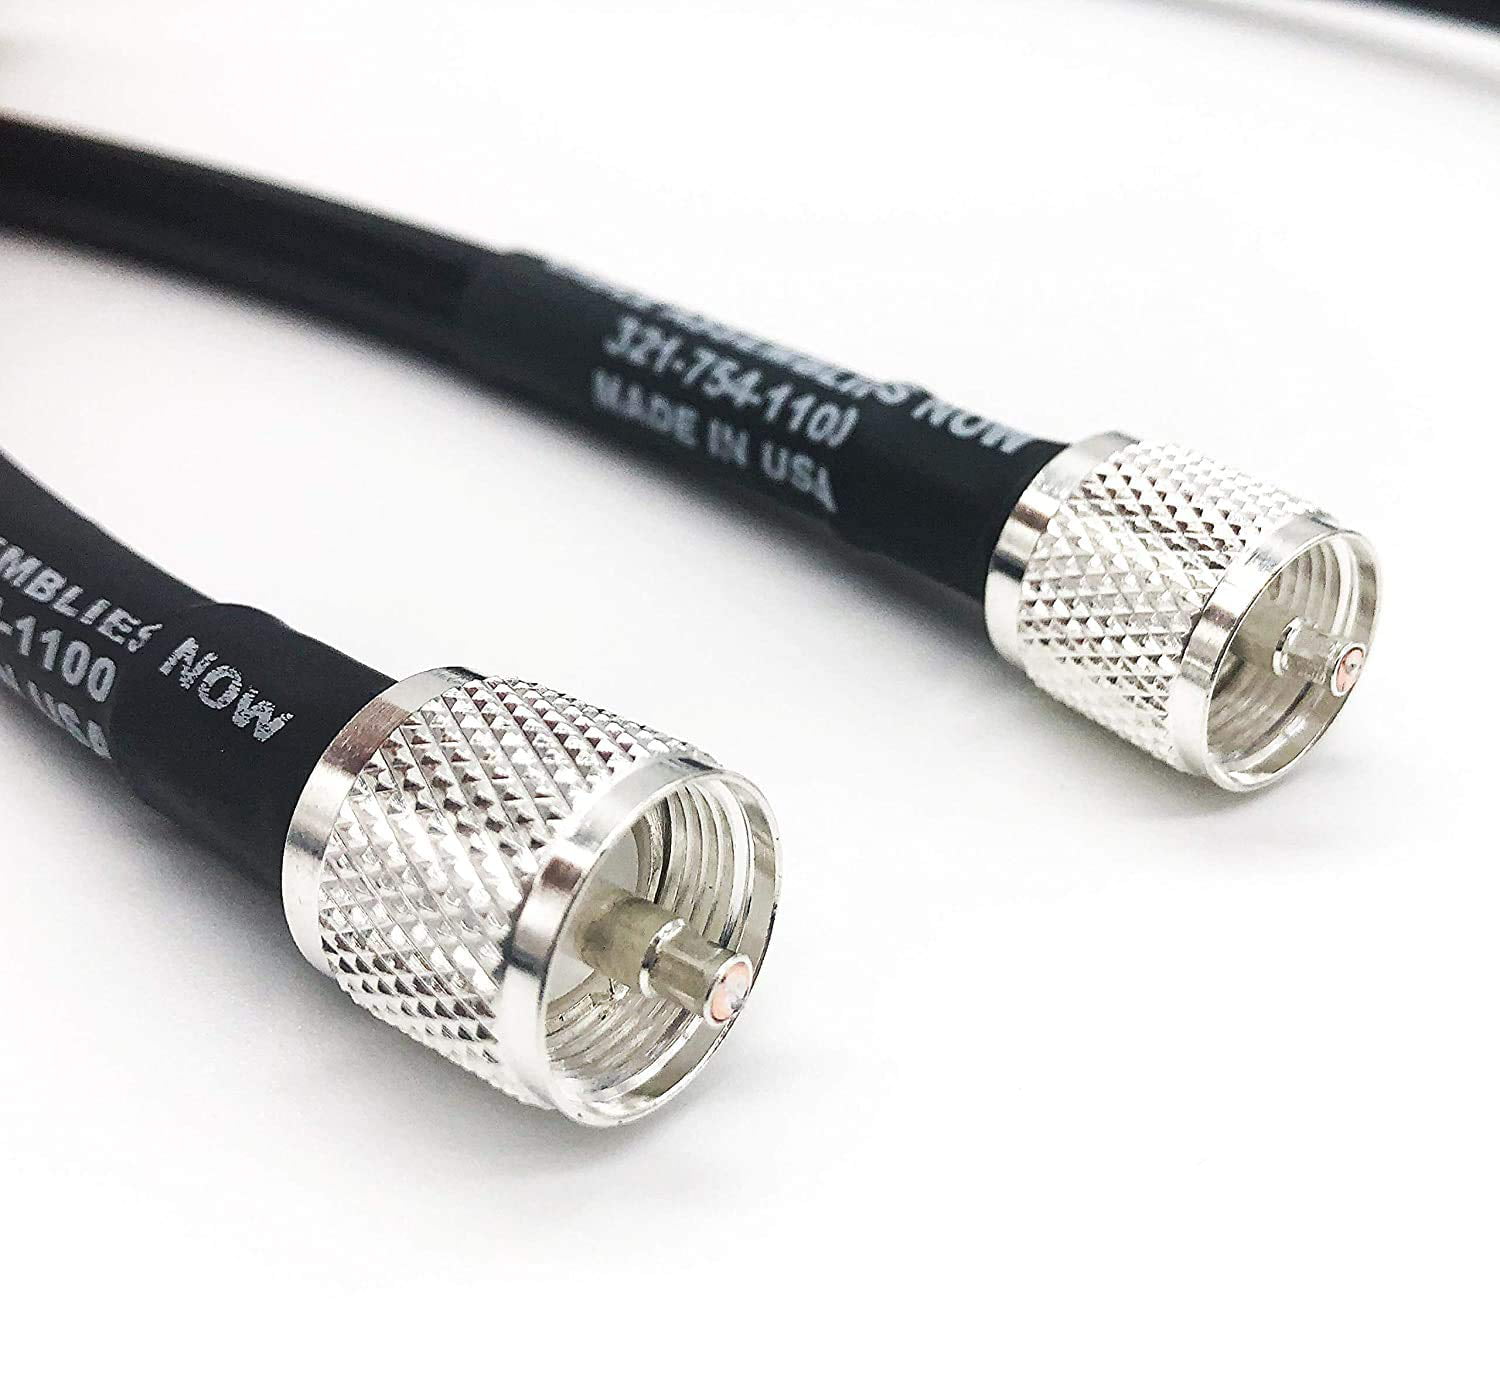 75 ft LMR-400 Antenna Transmision Coaxial Cable N male 